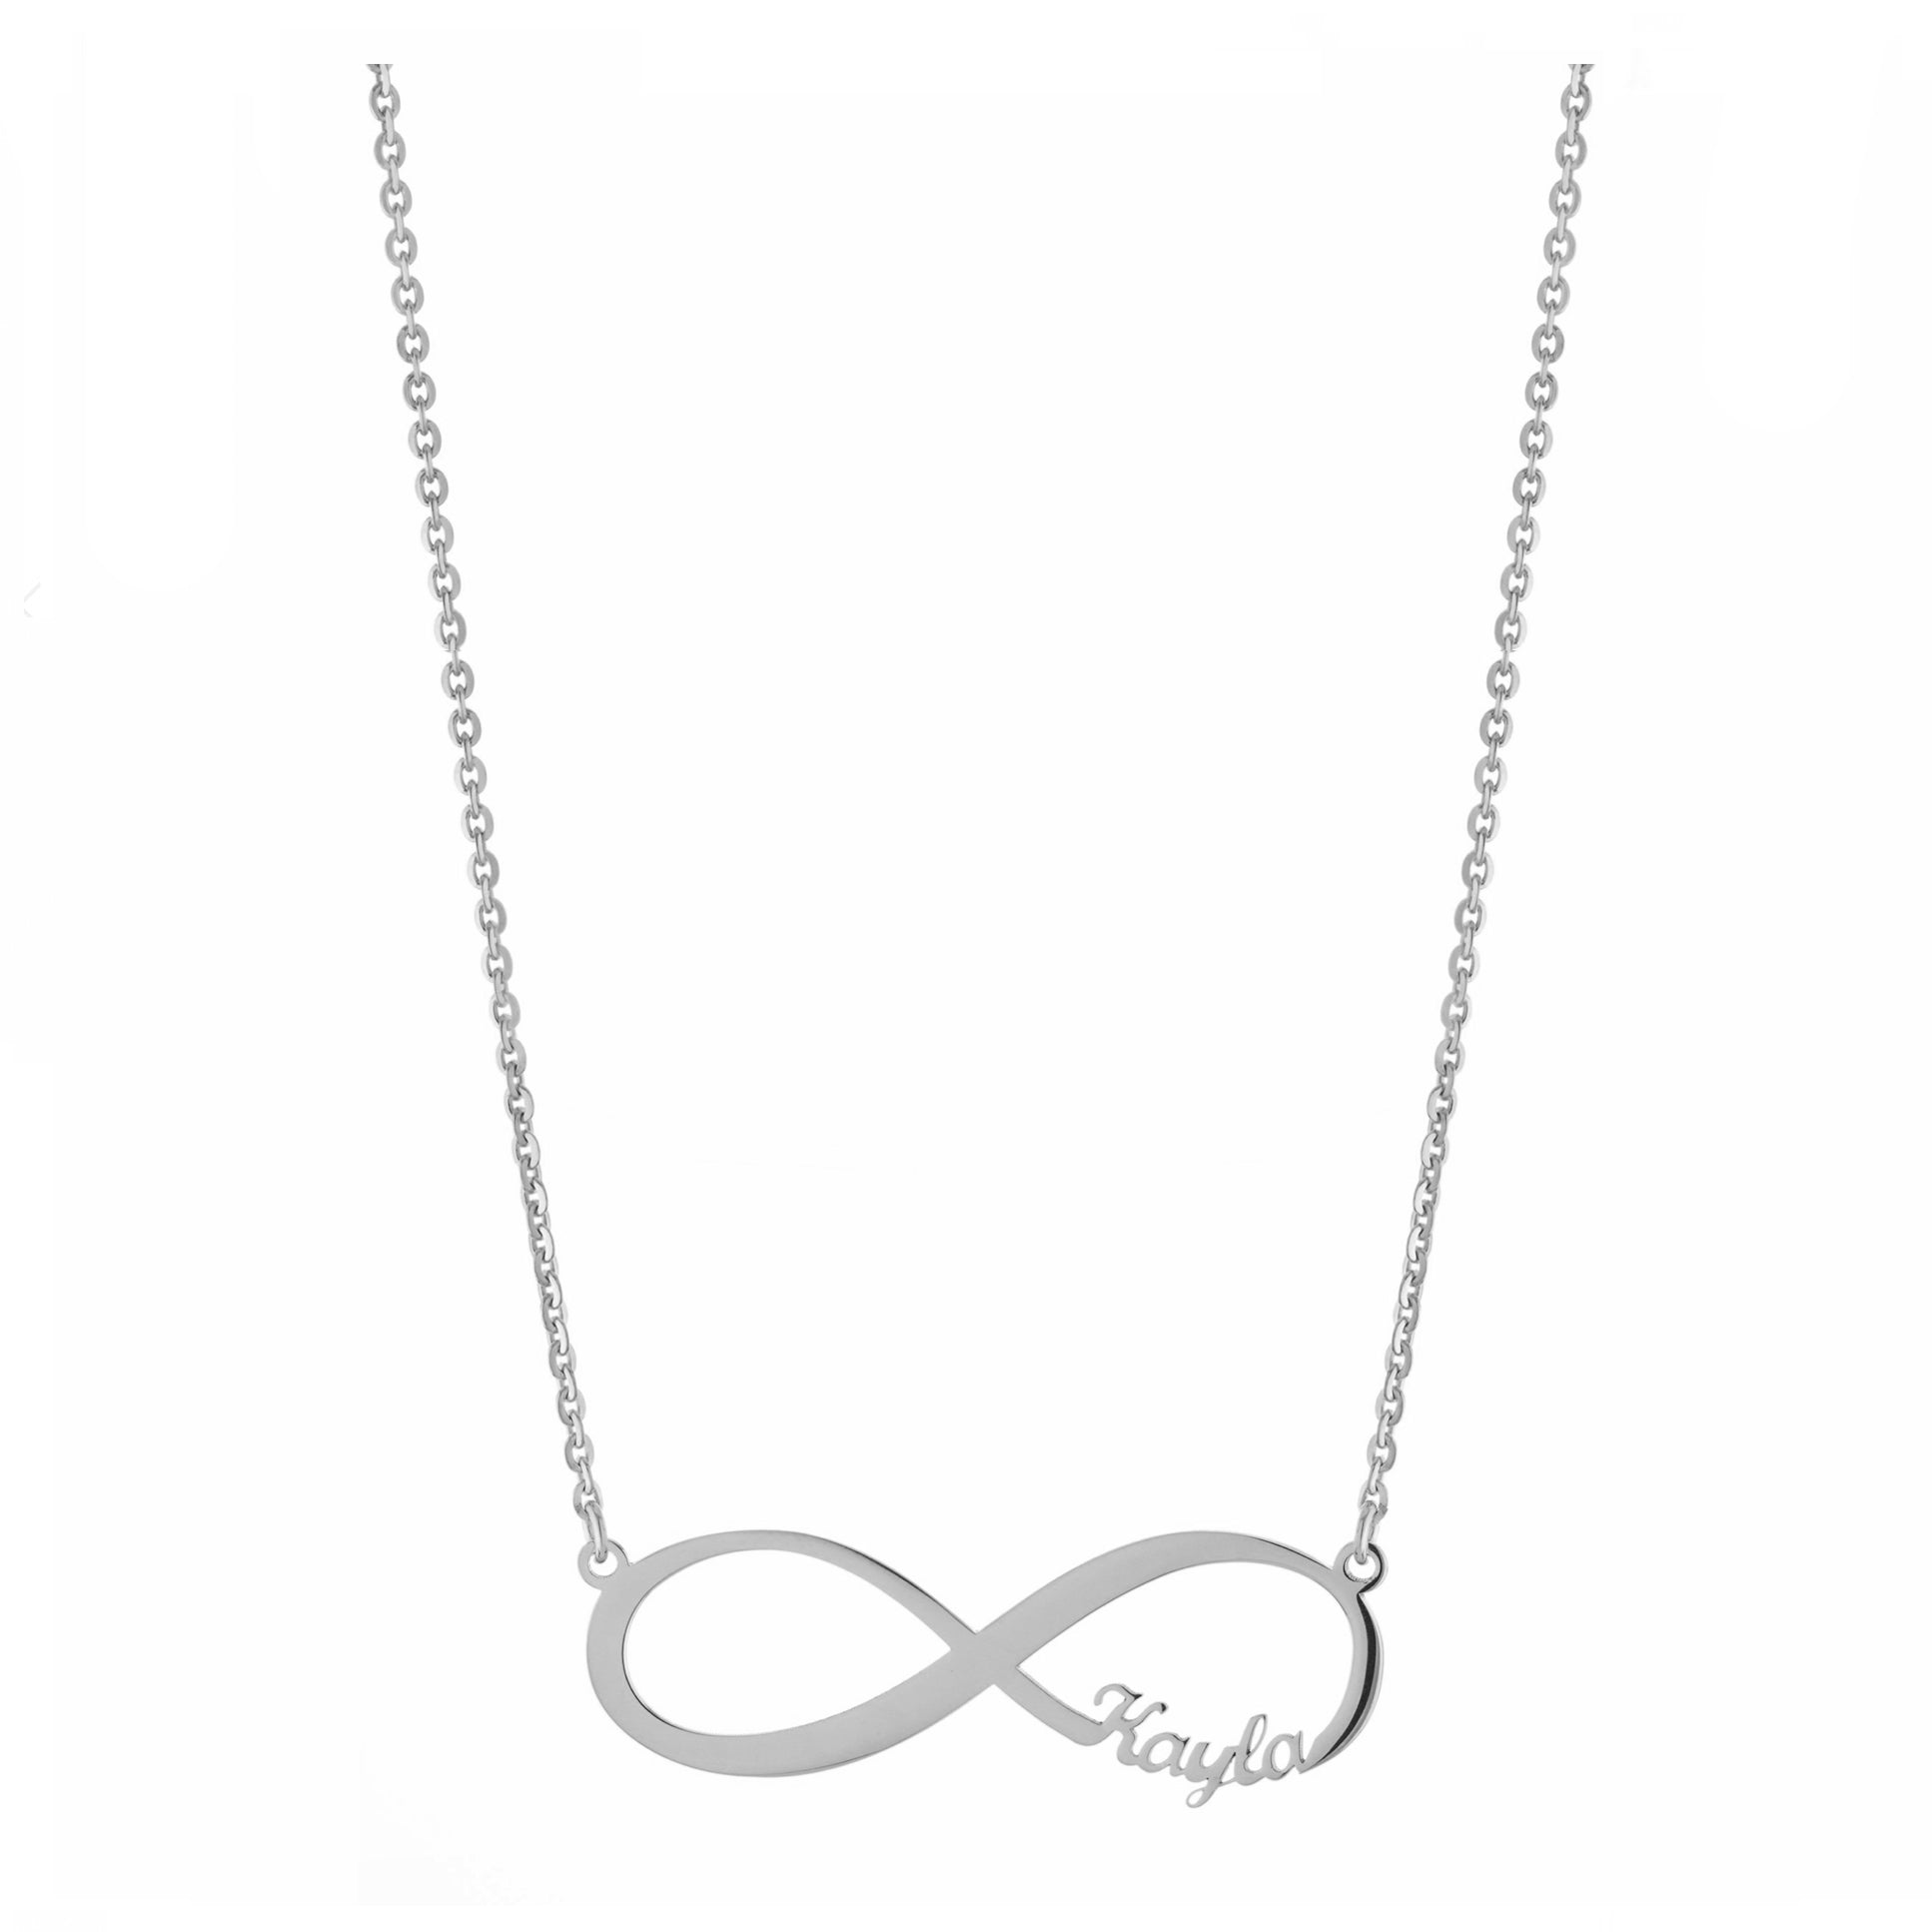 Personalized Script Name Infinity Necklace